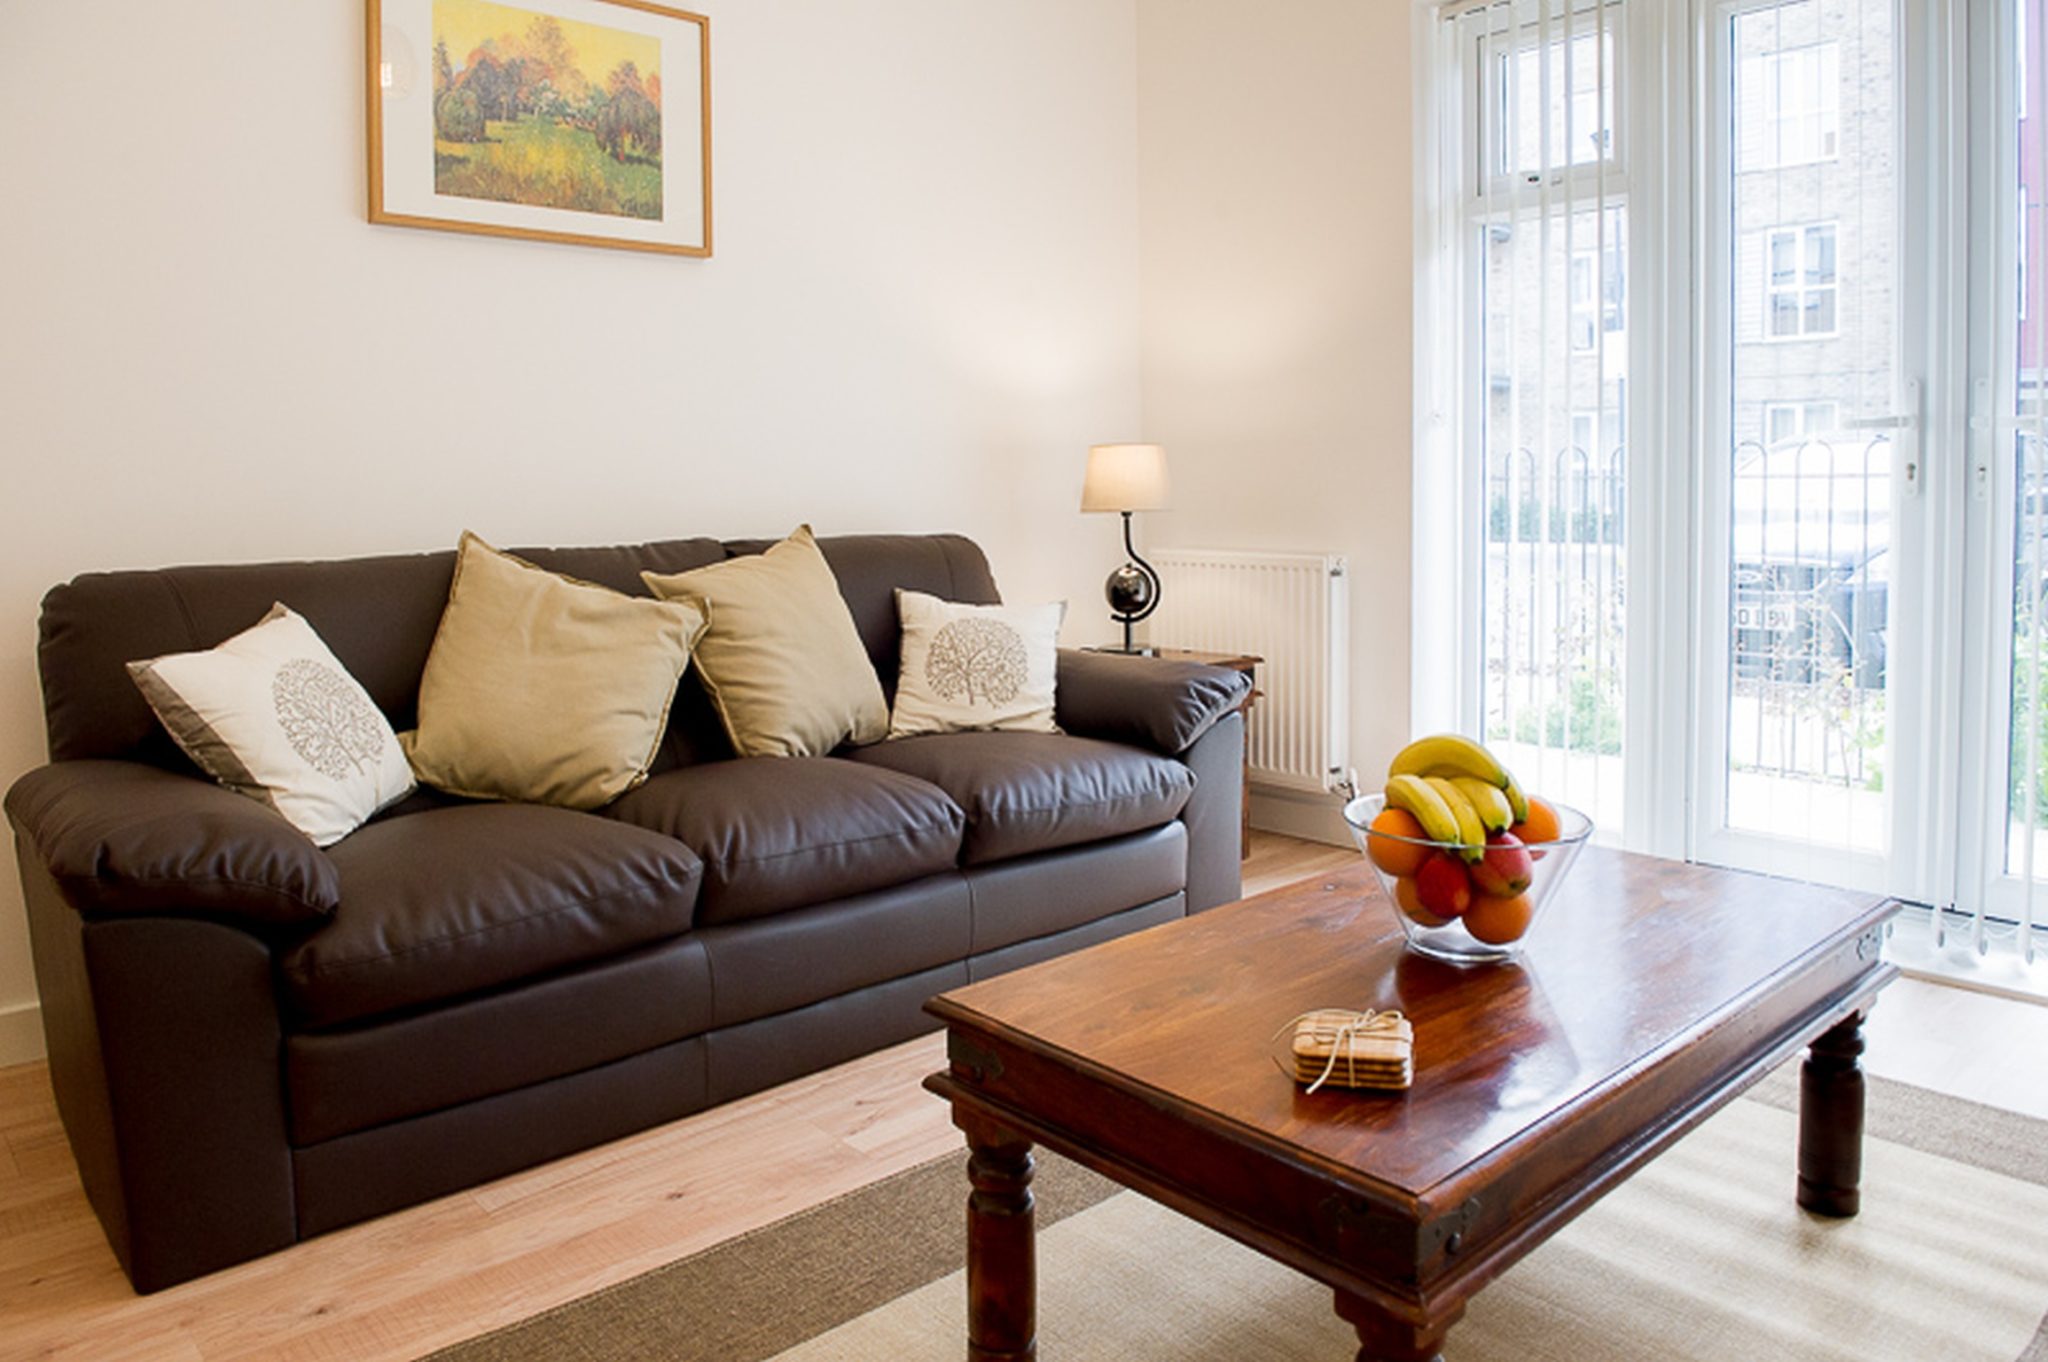 Garden Court Apartments Serviced Apartments - West Drayton | Urban Stay